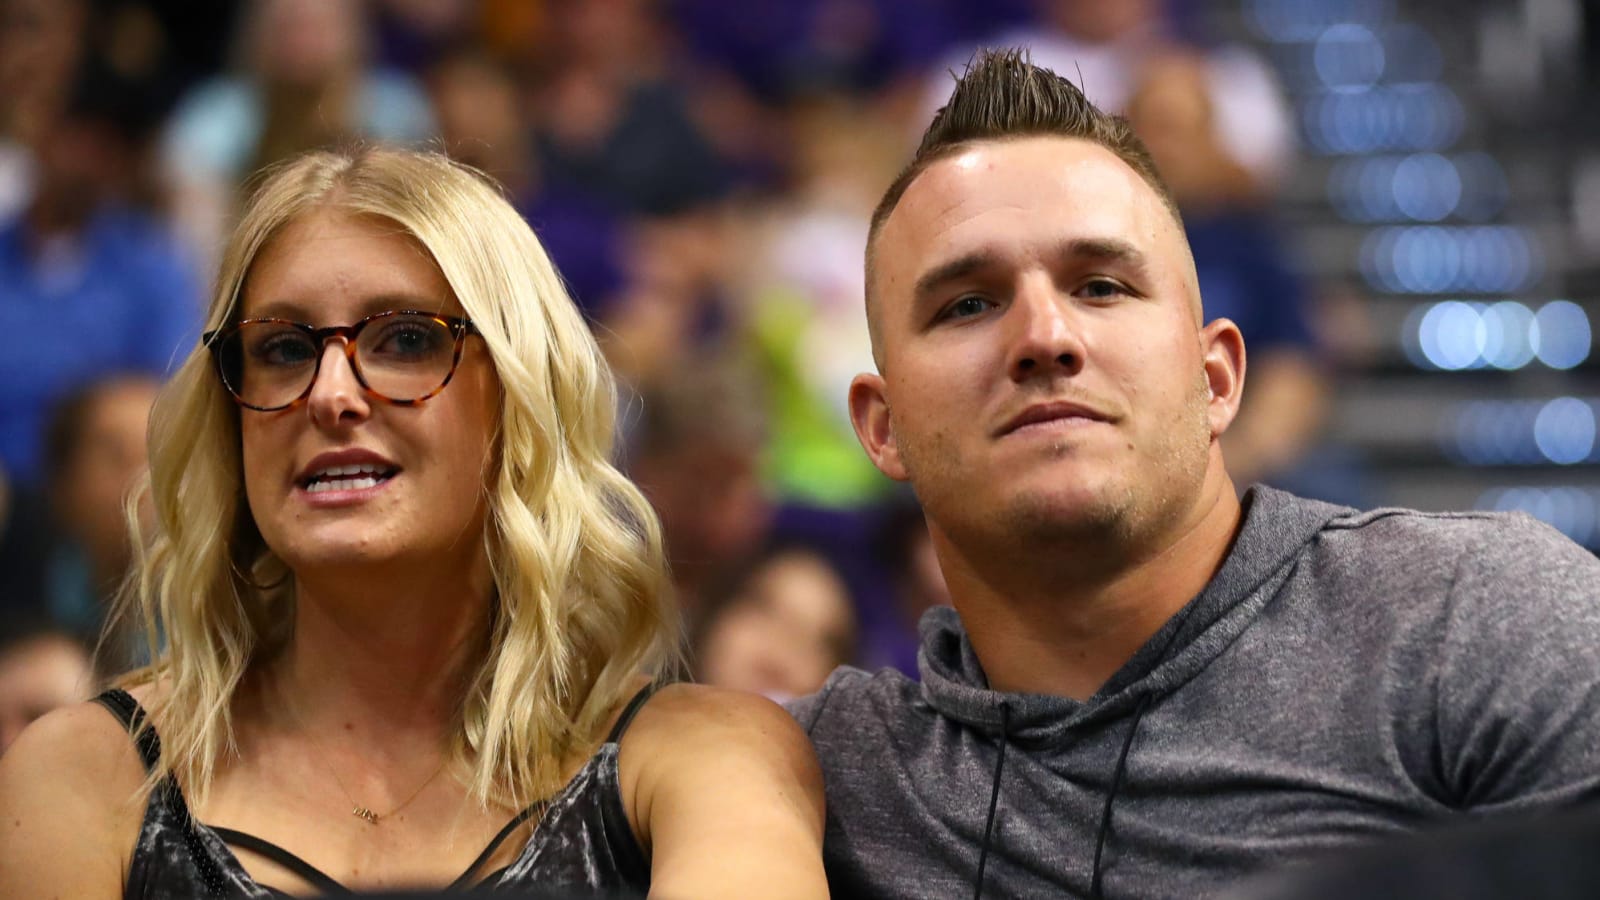 Mike Trout's wife Jessica shares pregnancy news with great video